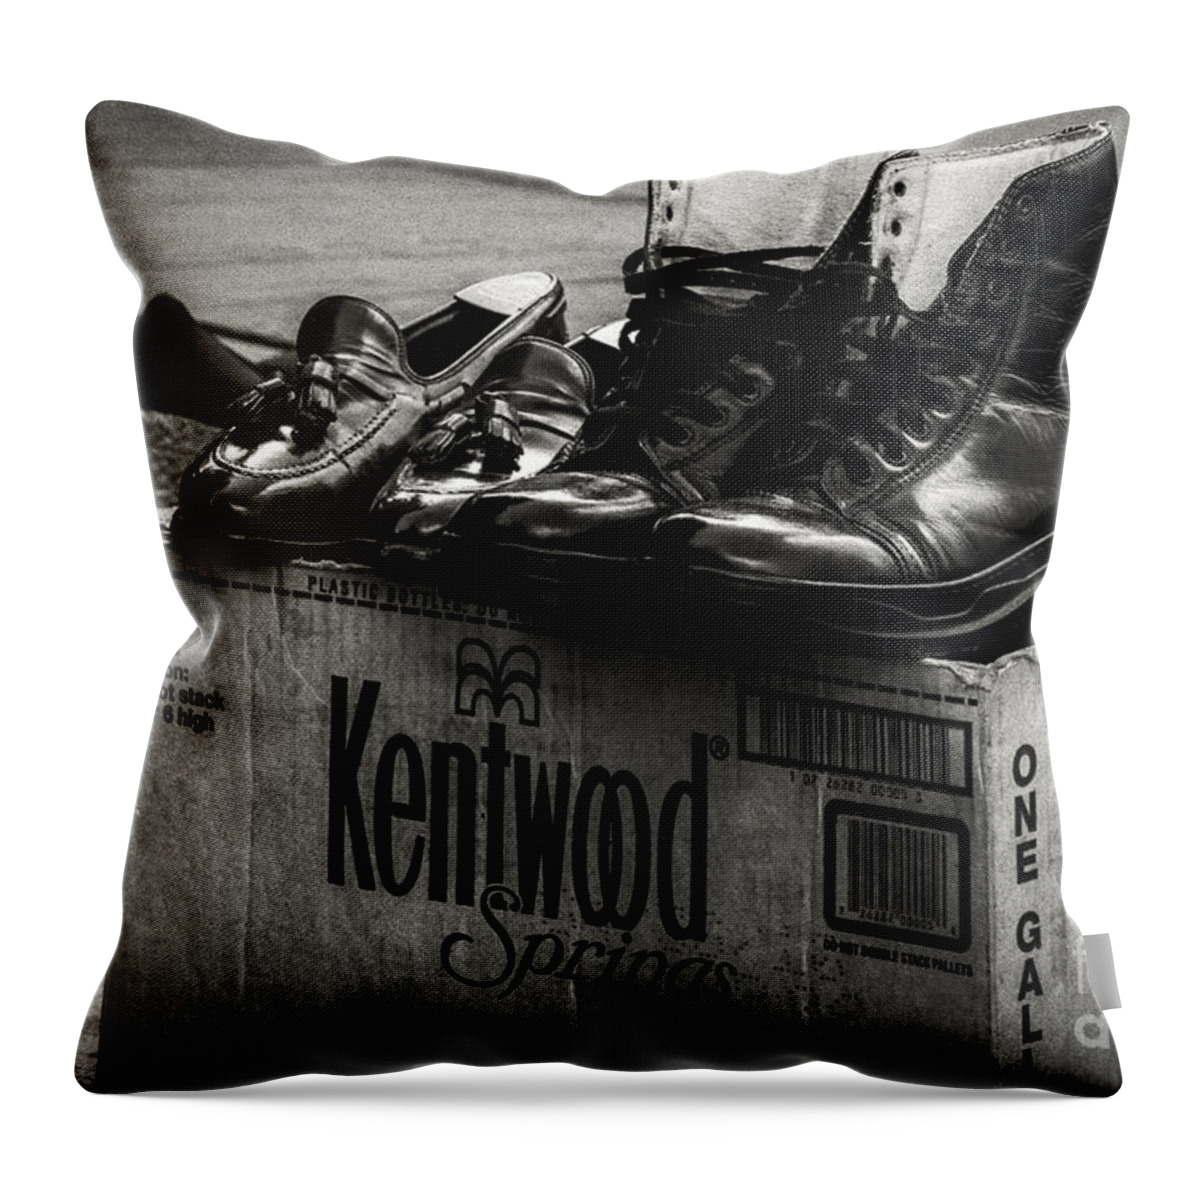 Shoes Throw Pillow featuring the photograph The Shoeshine Man's Shoes by Kathleen K Parker